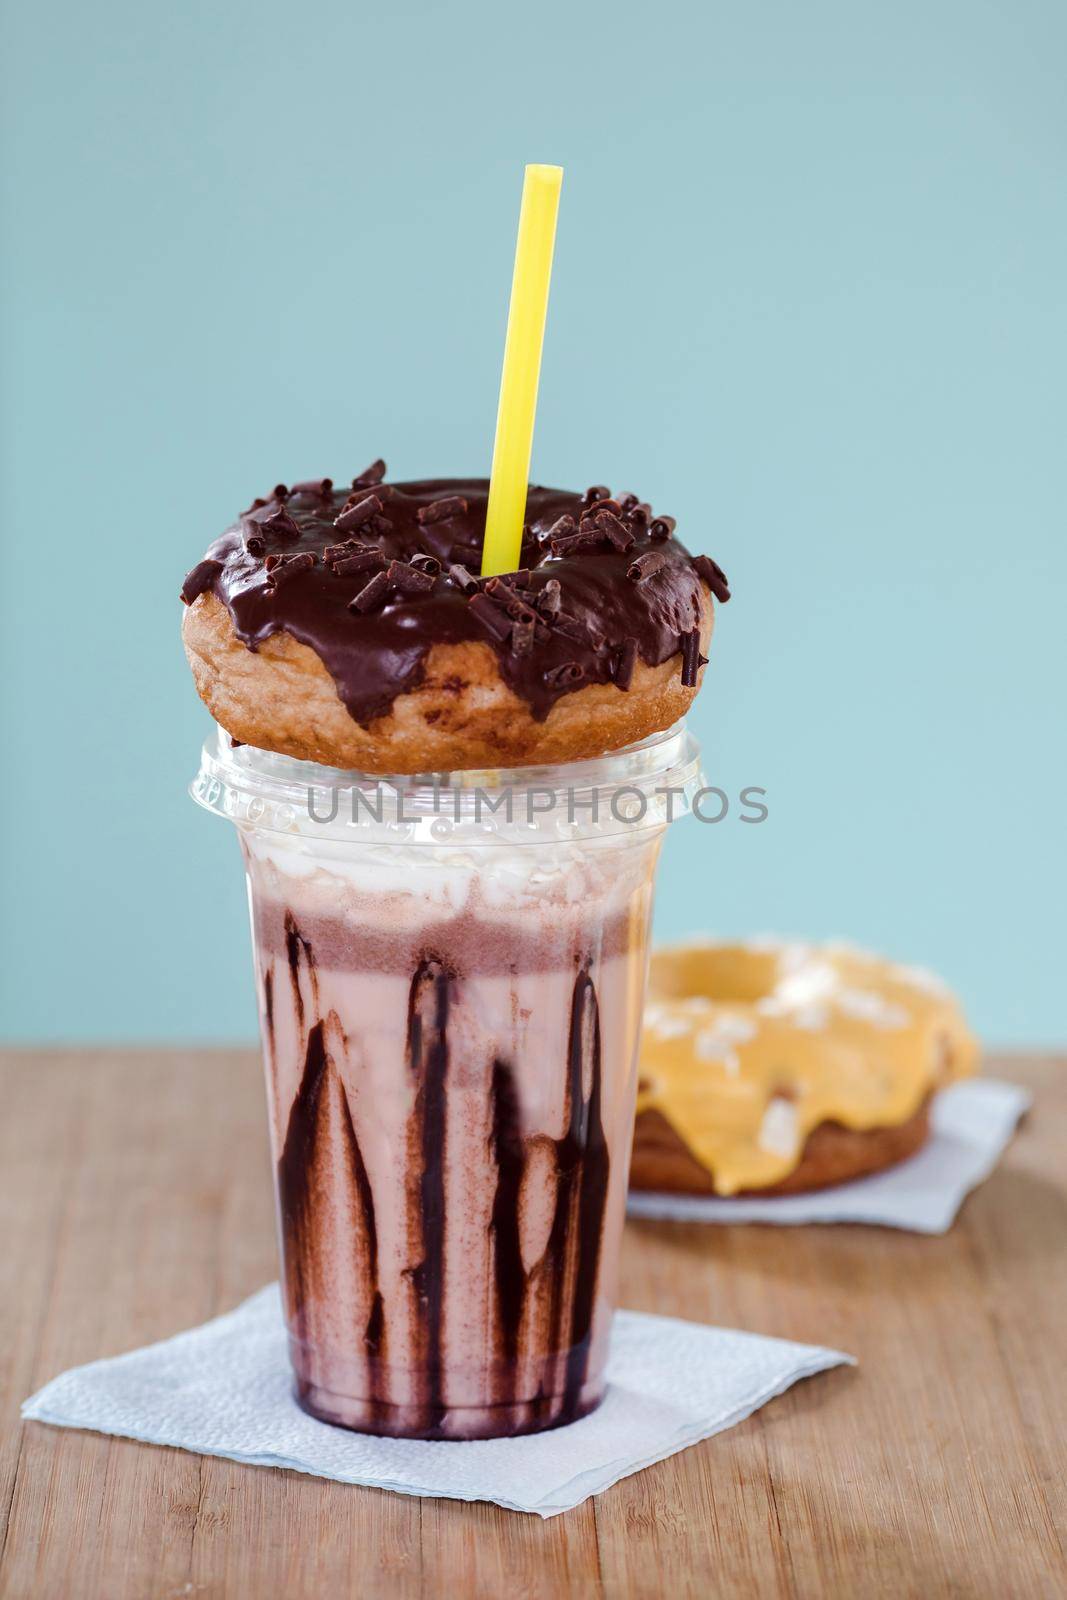 Chocolate extreme milkshakein donuts a plastic cup by Demkat